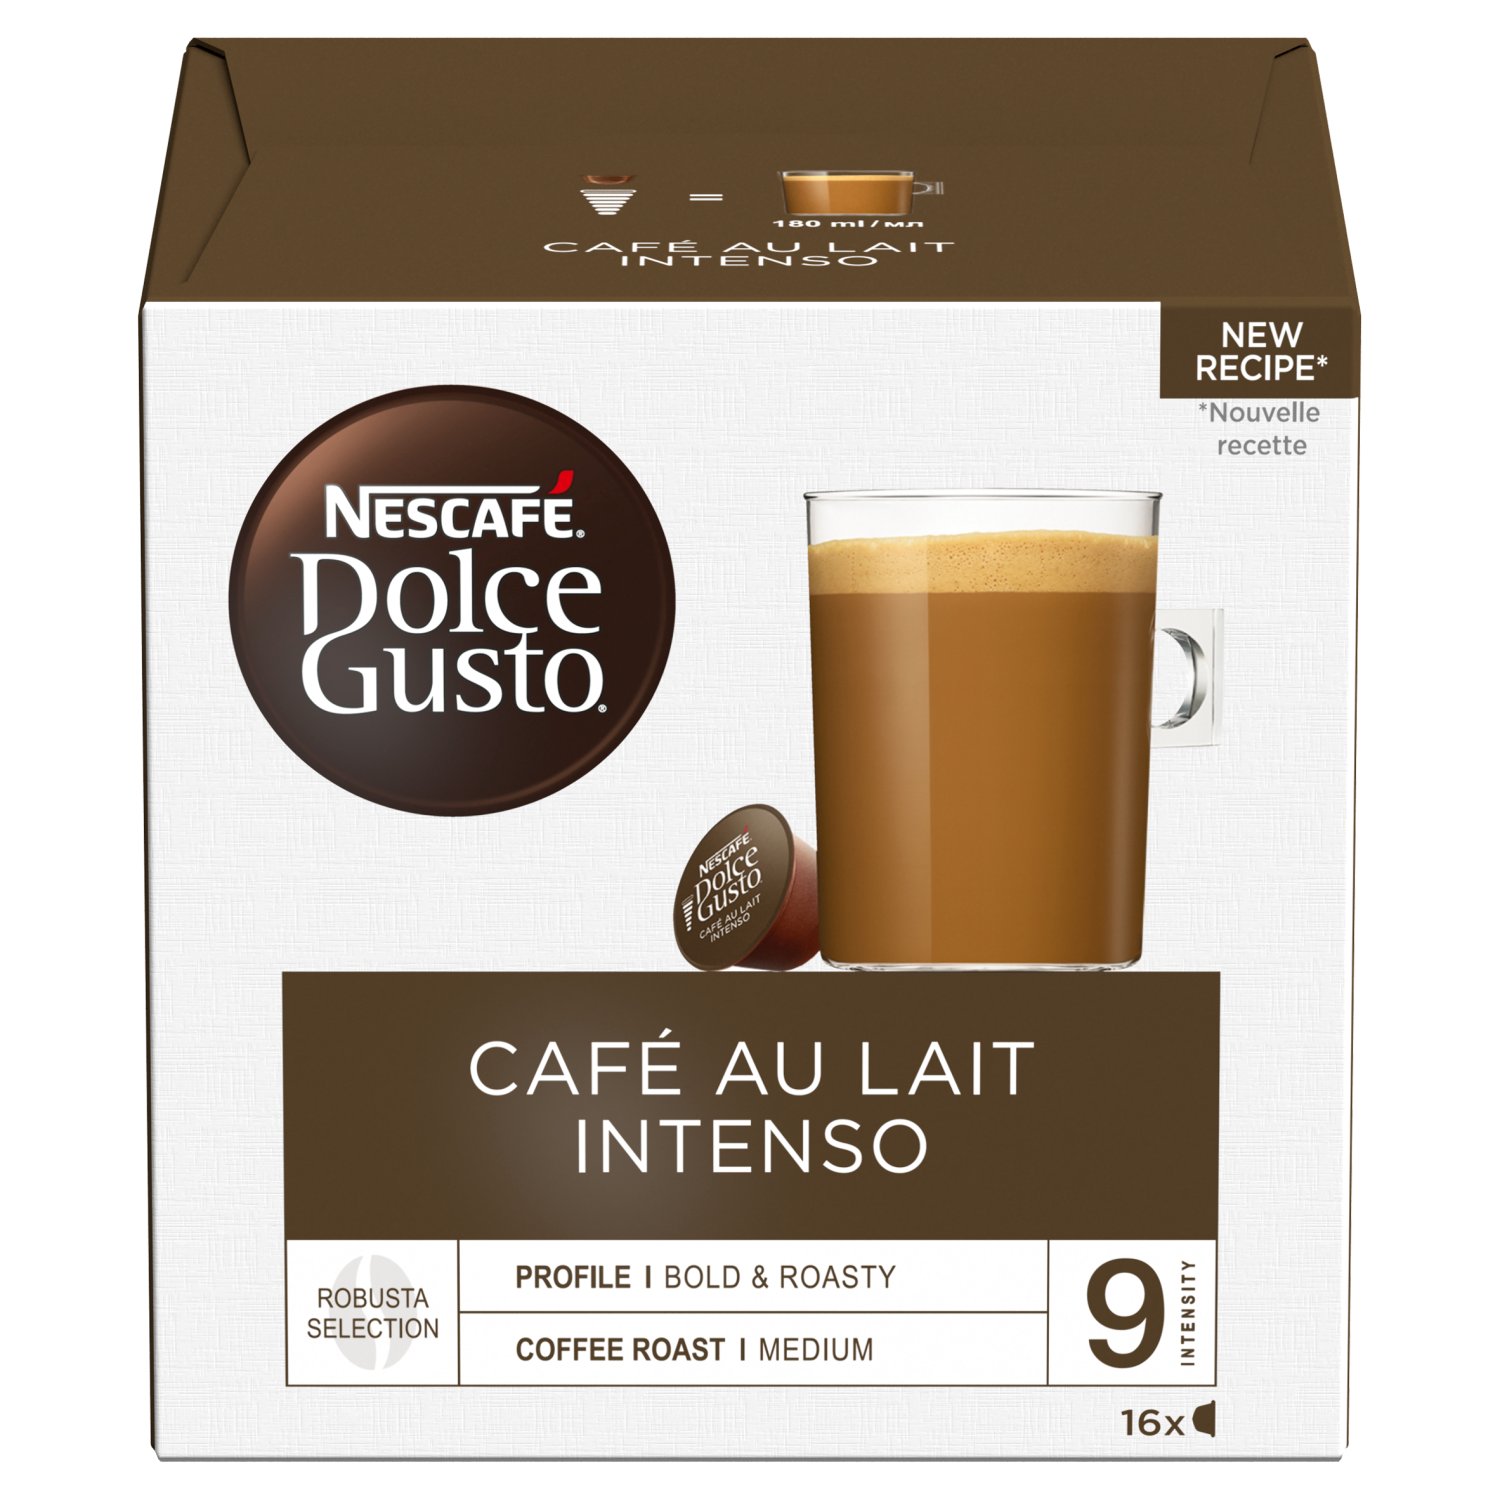 Nescafe Dolce Gusto Cafe Au Lait Coffee Capsules 16 Pack (160 g)